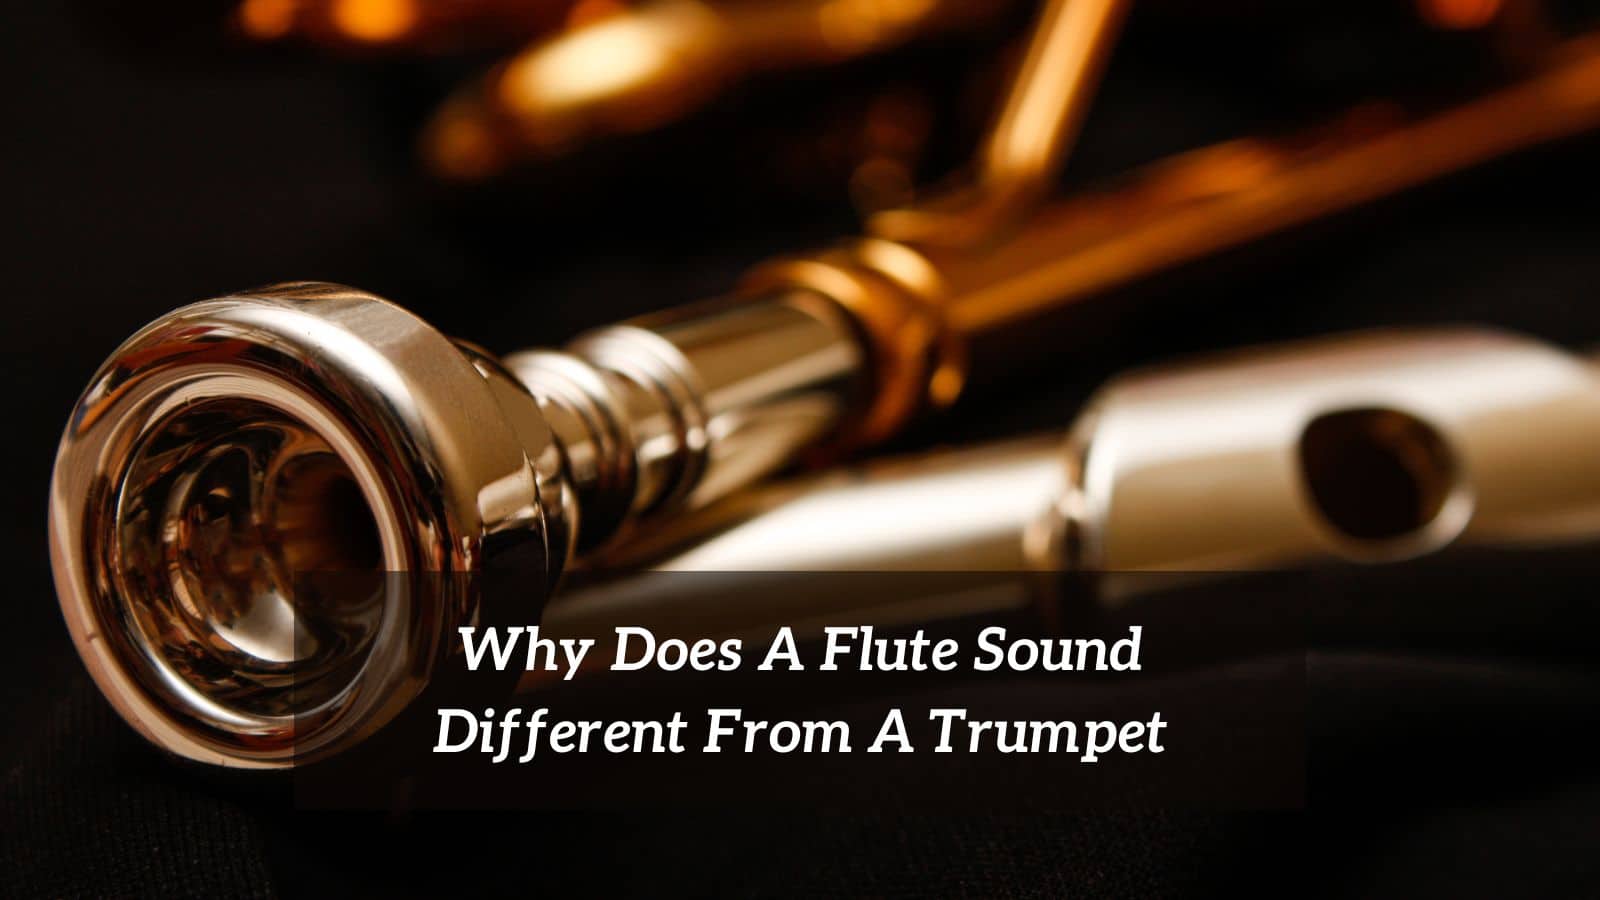 Why Does A Flute Sound Different From A Trumpet